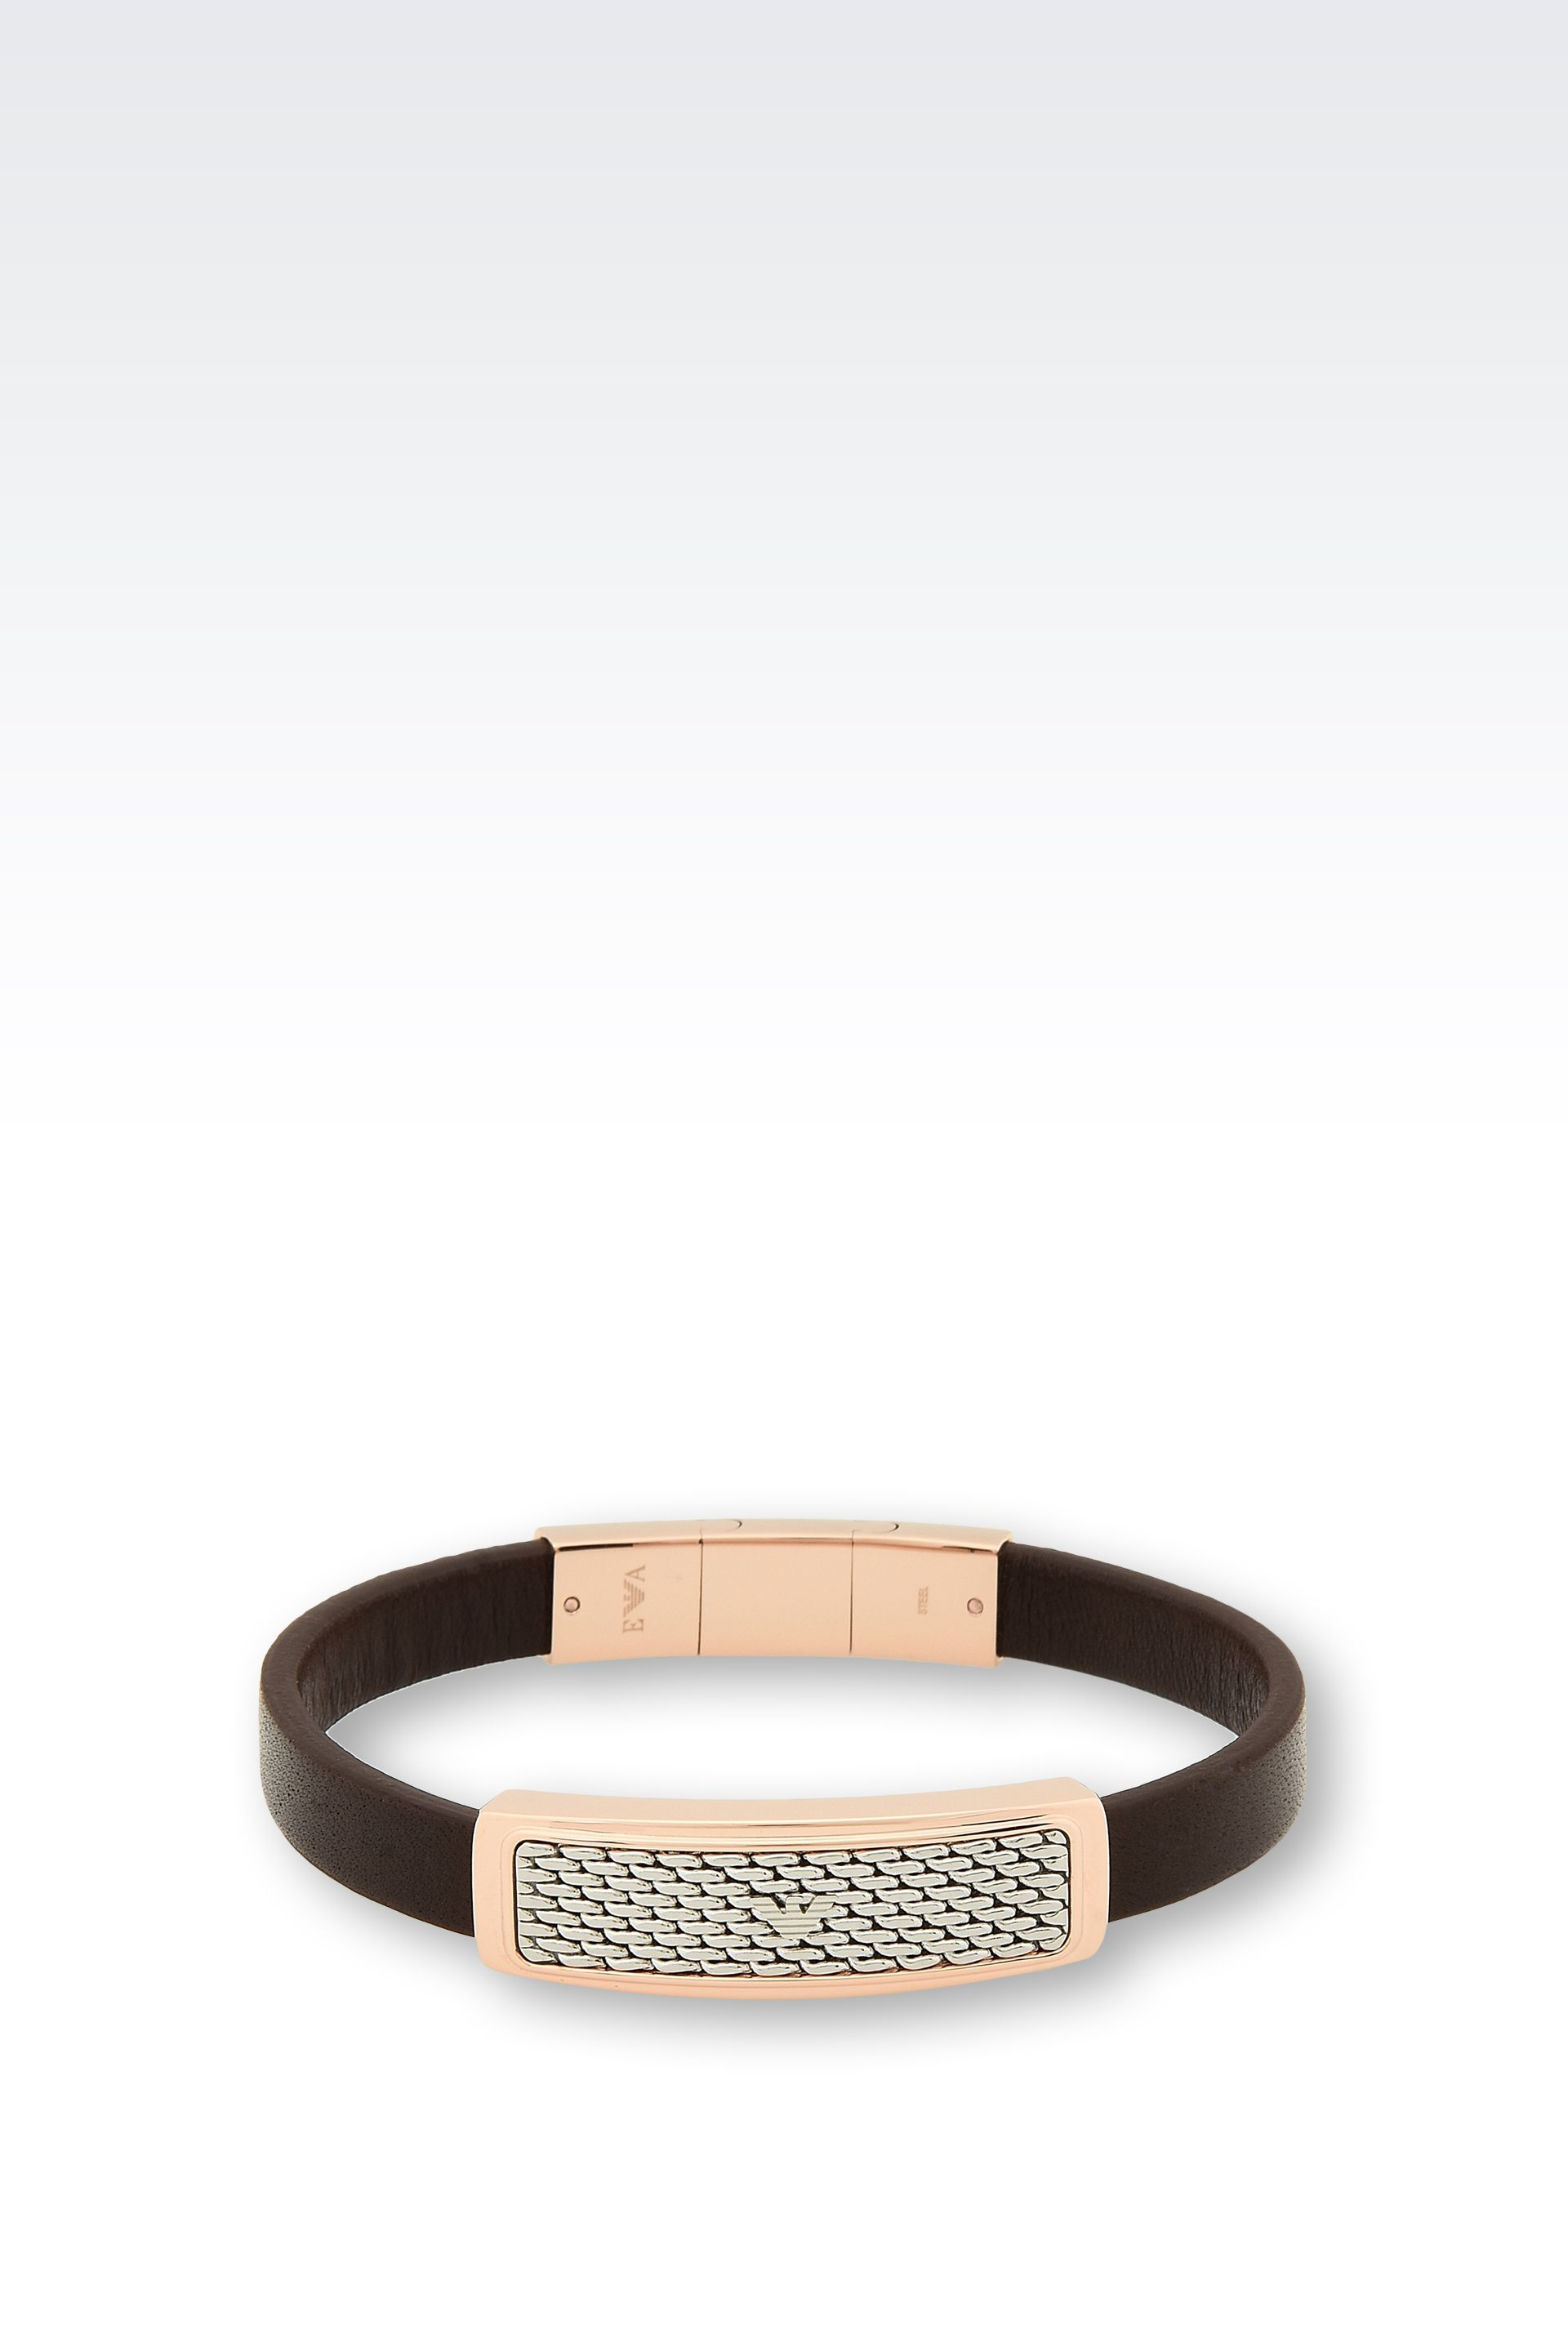 Sterling Silver Id Bracelet by Emporio Armani at ORCHARD MILE